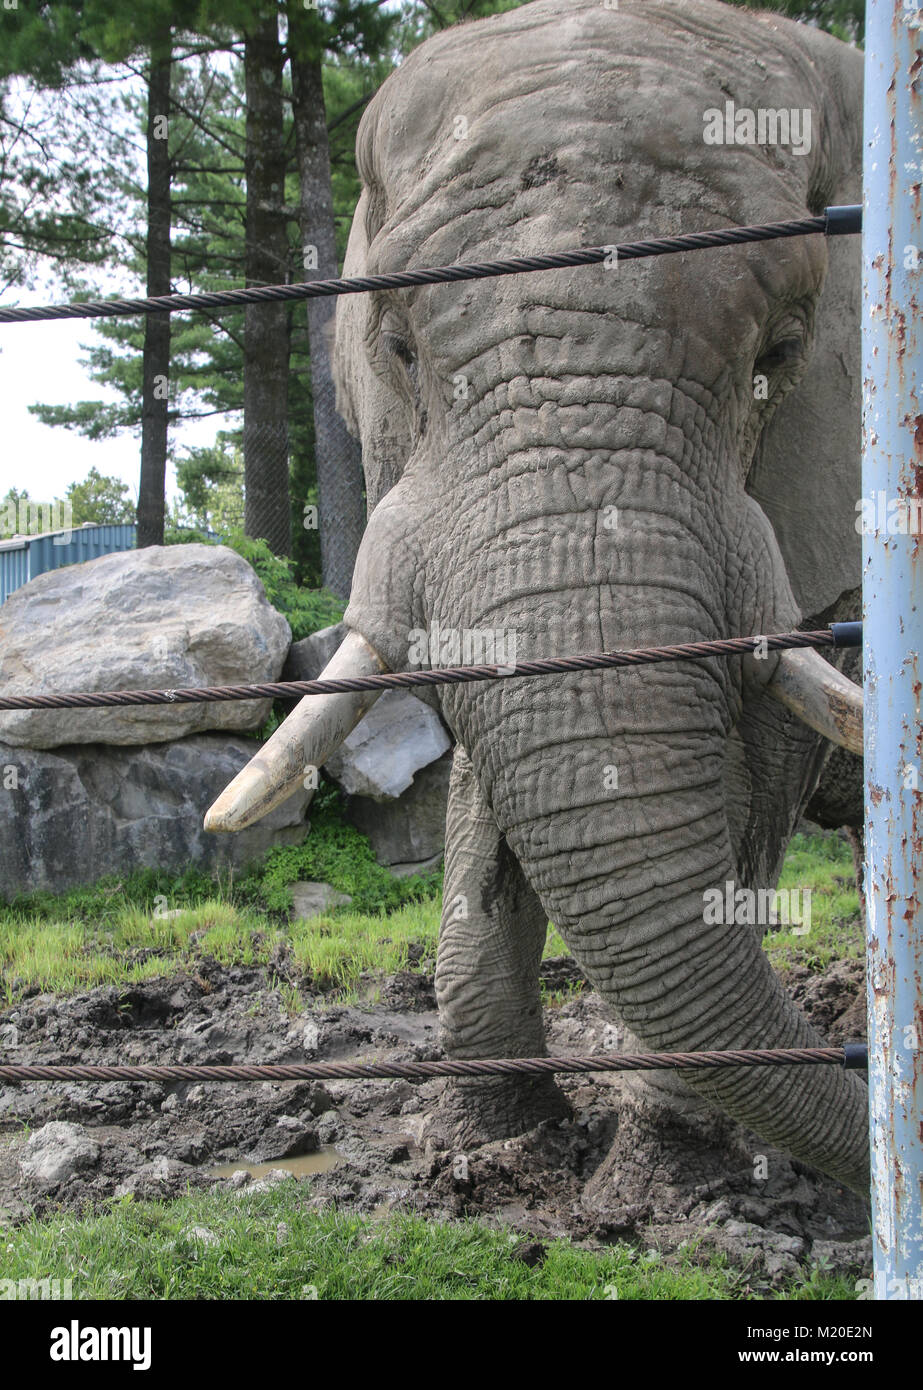 Gray African elephant at zoo in outside enclosure that is done with steel cable as gate. Stock Photo